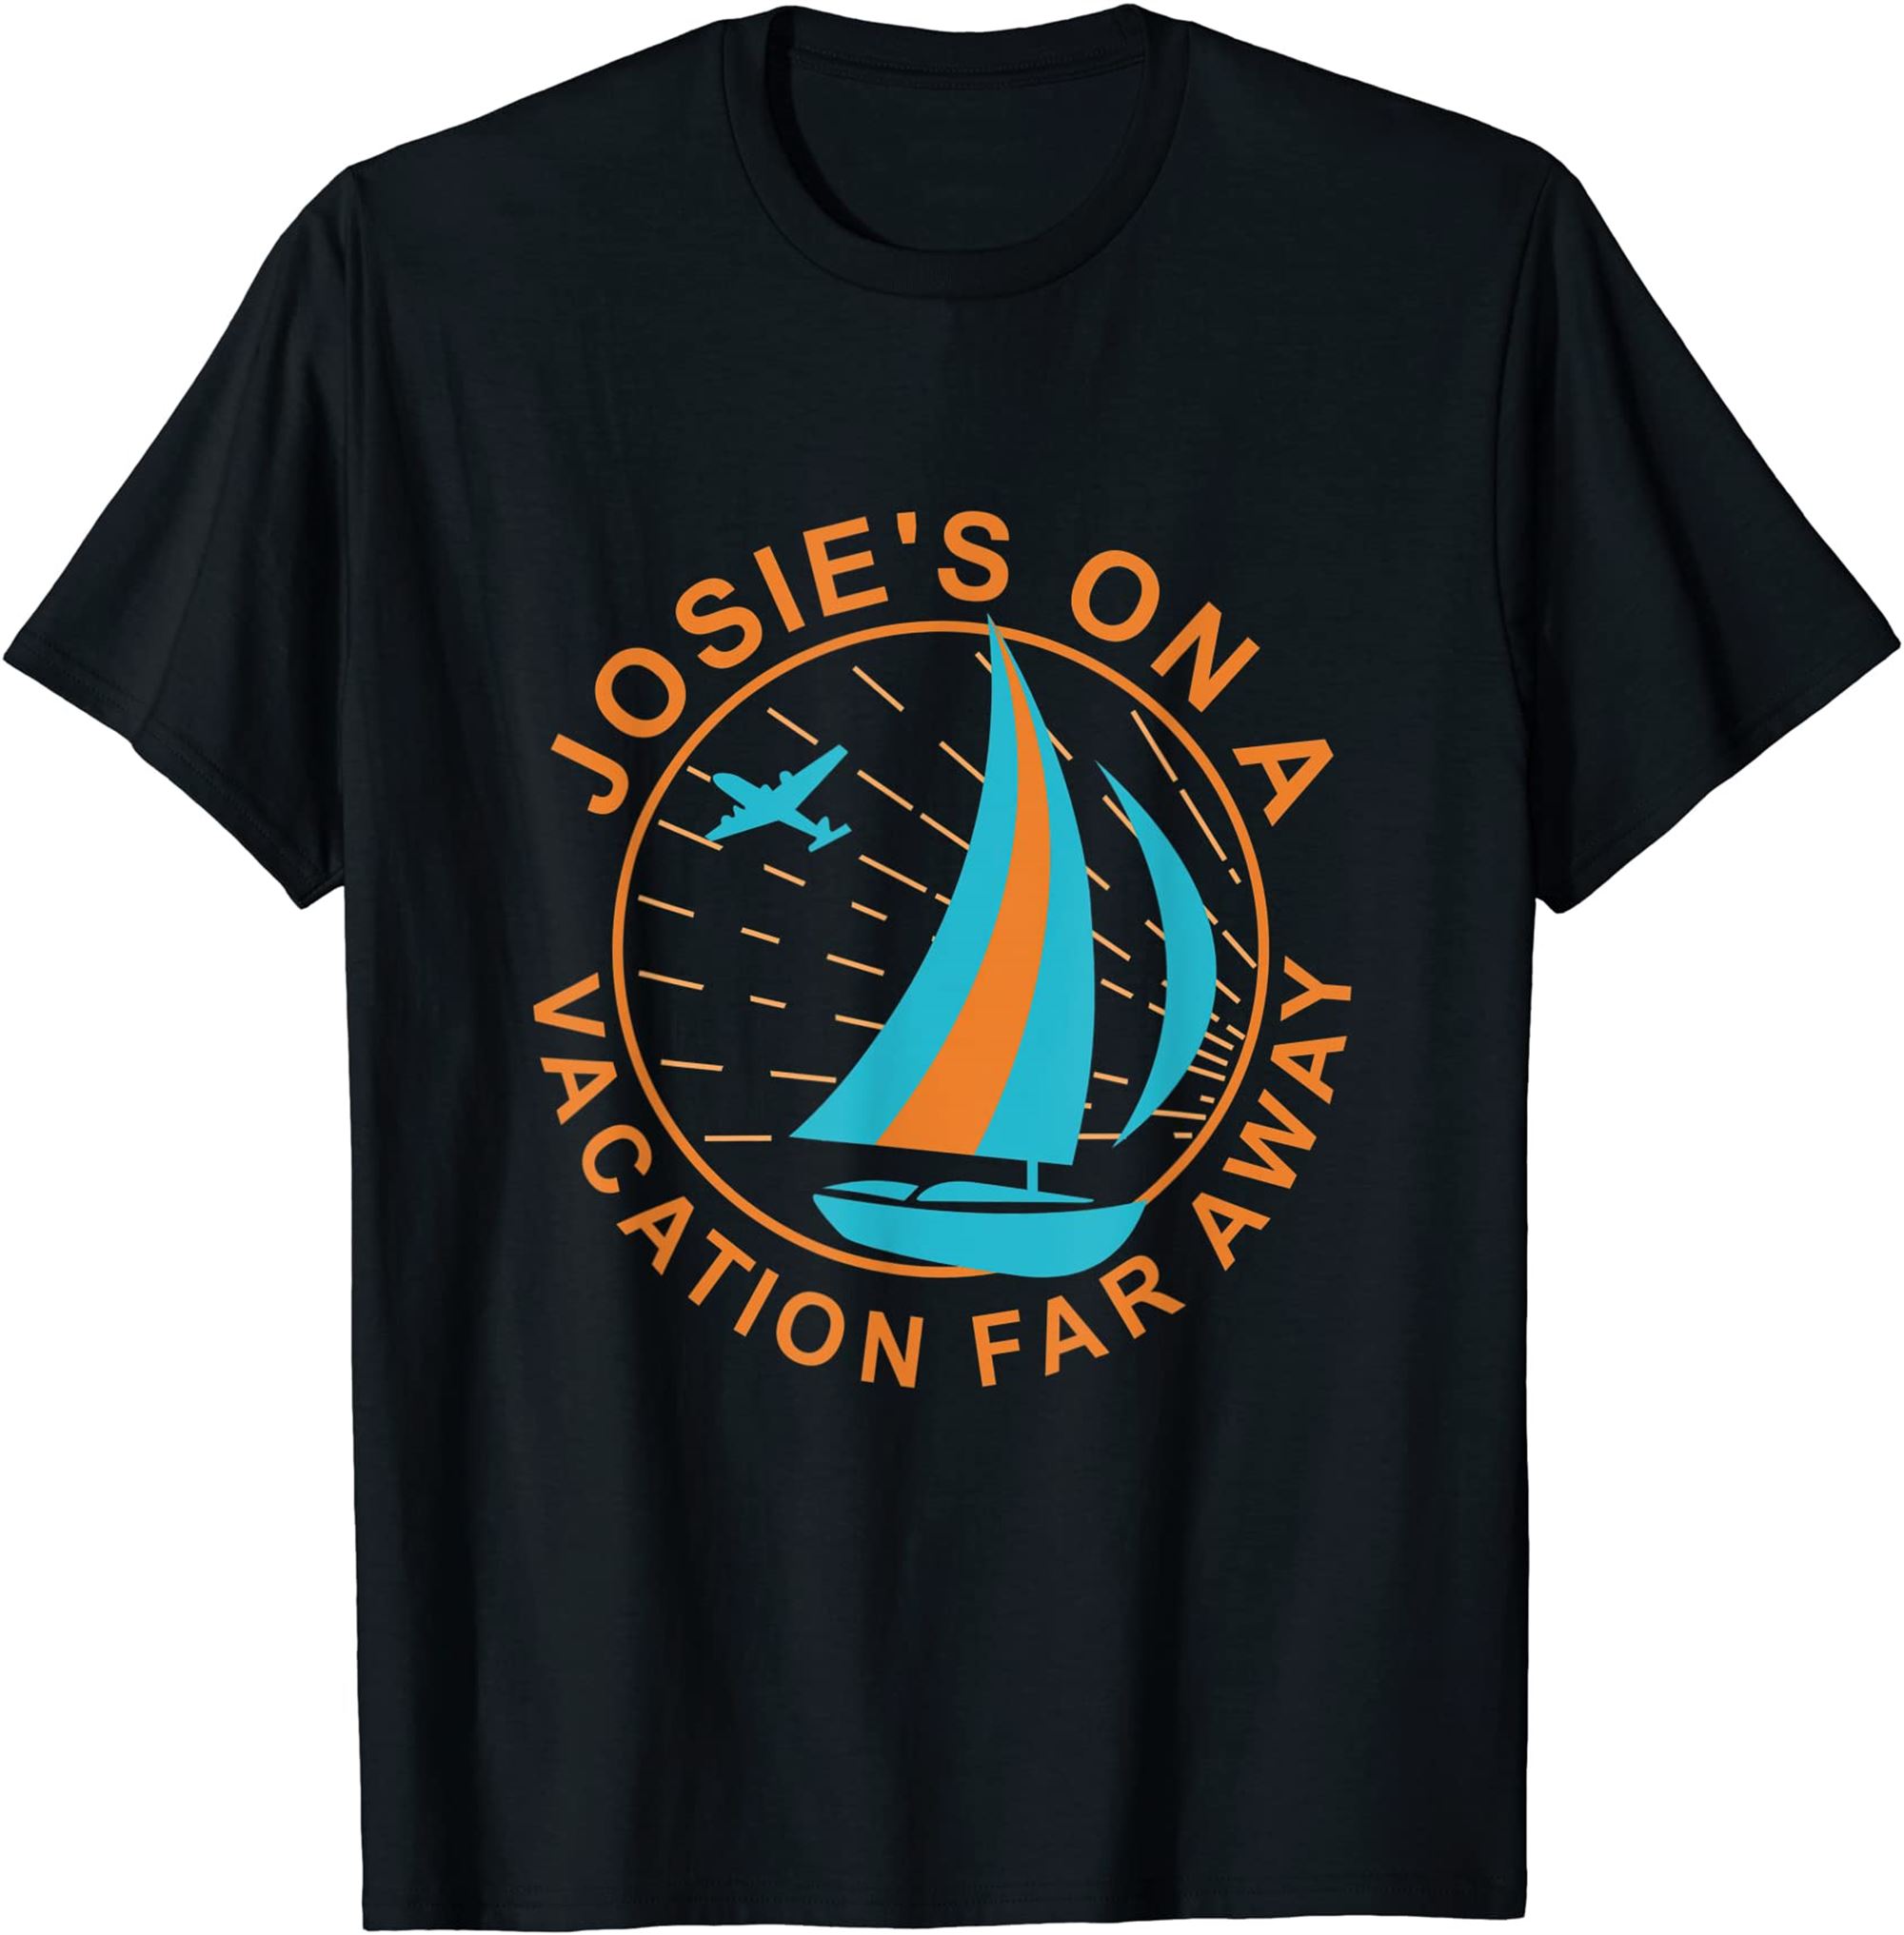 Josies On A Vacation Far Away T-shirt Plus Size Up To 5xl